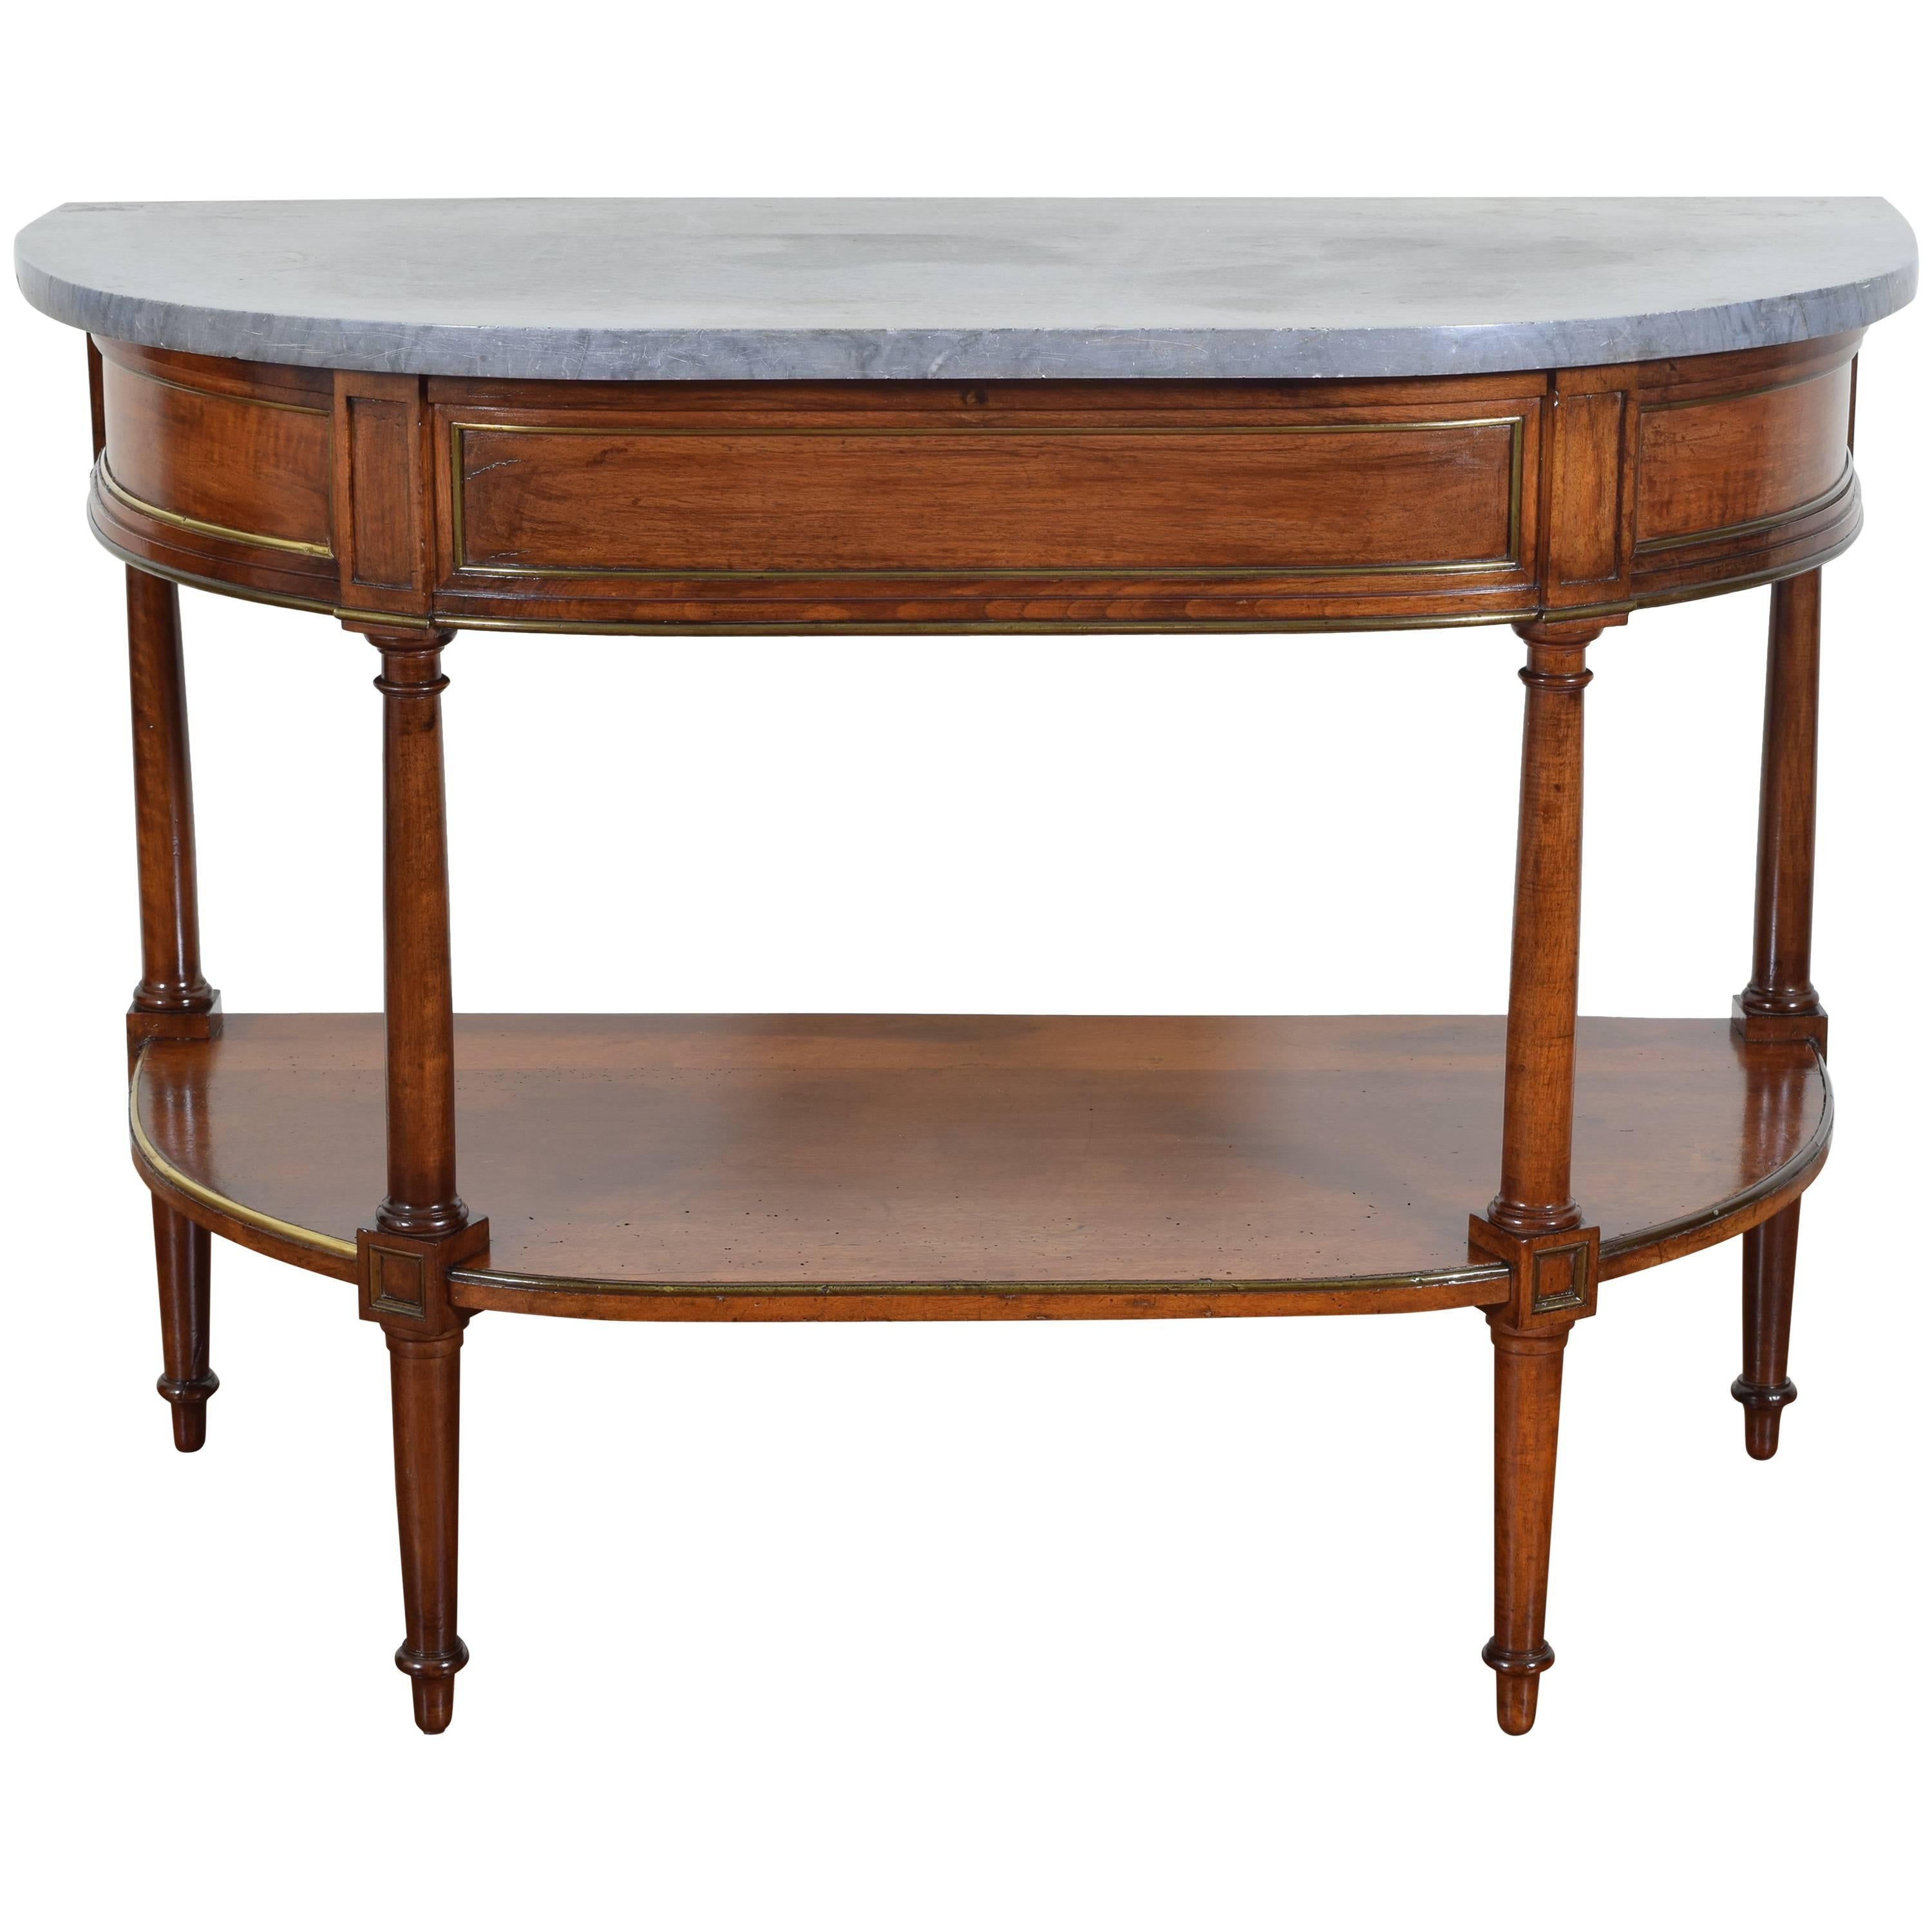 French Directoire Cherrywood, Marble-Top Console Table, Early 19th Century